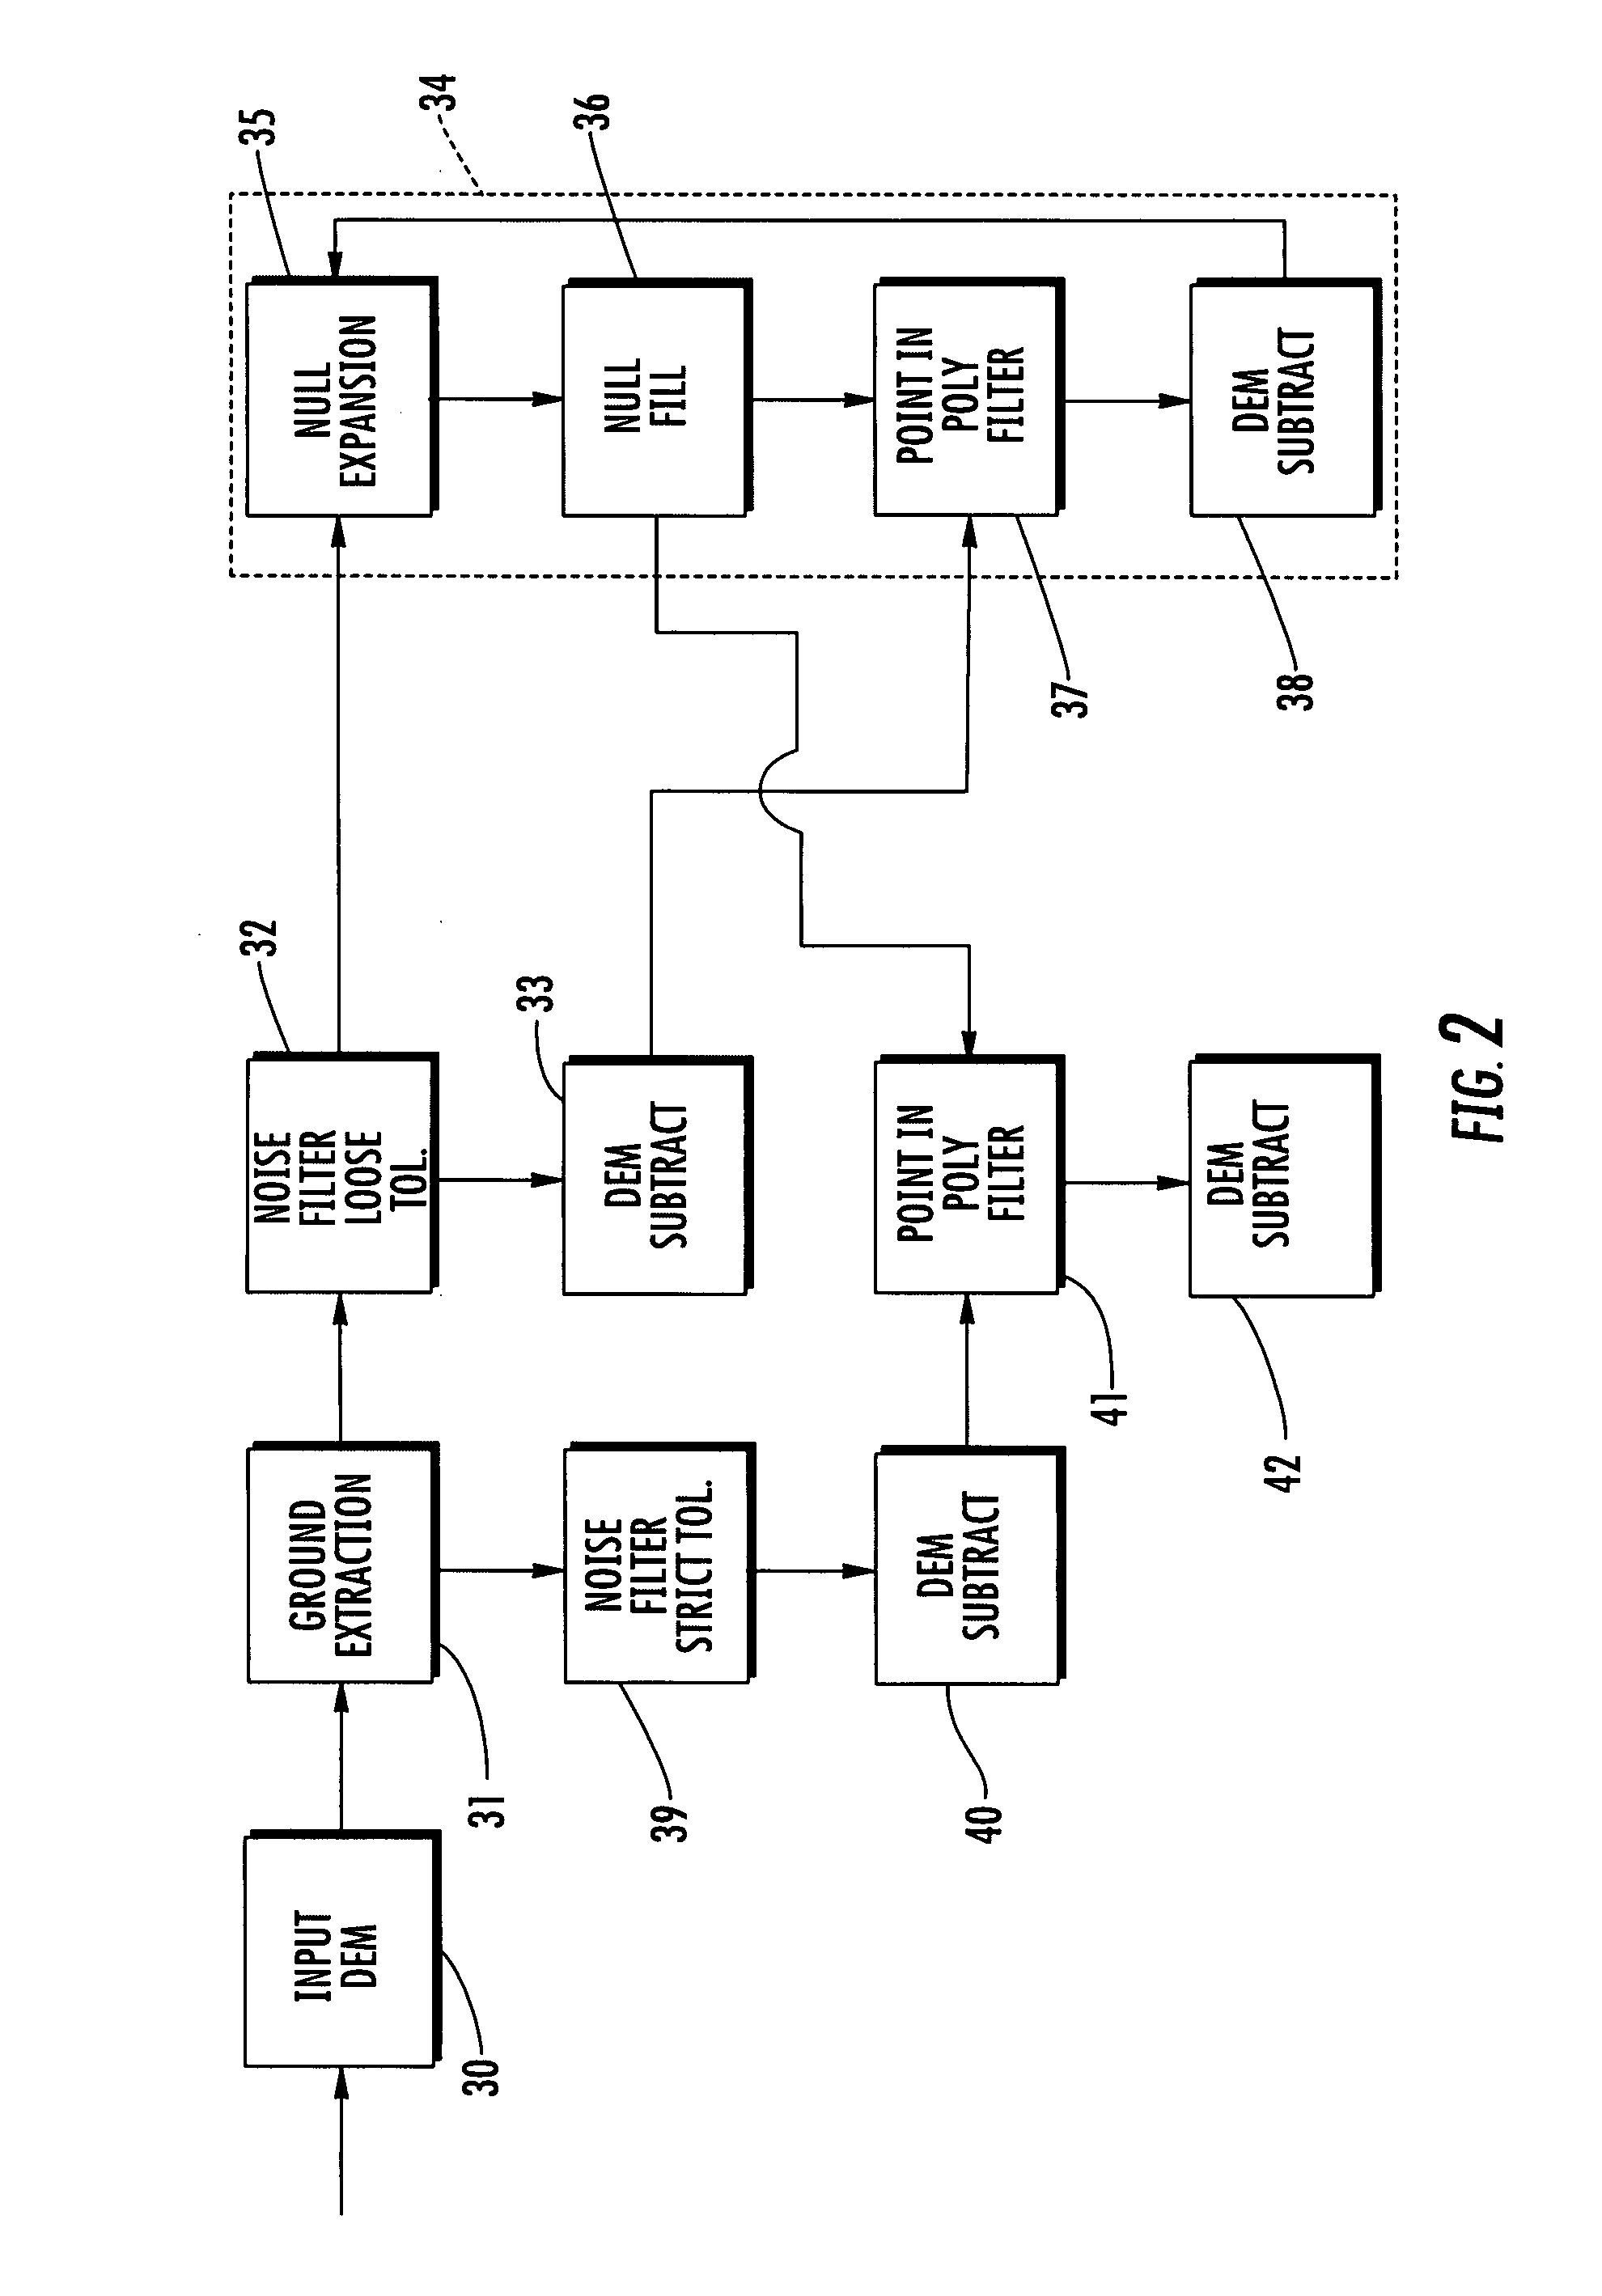 Geospatial modeling system for separating foliage data from building data based upon loose and strict tolerance noise filtering operations and related methods